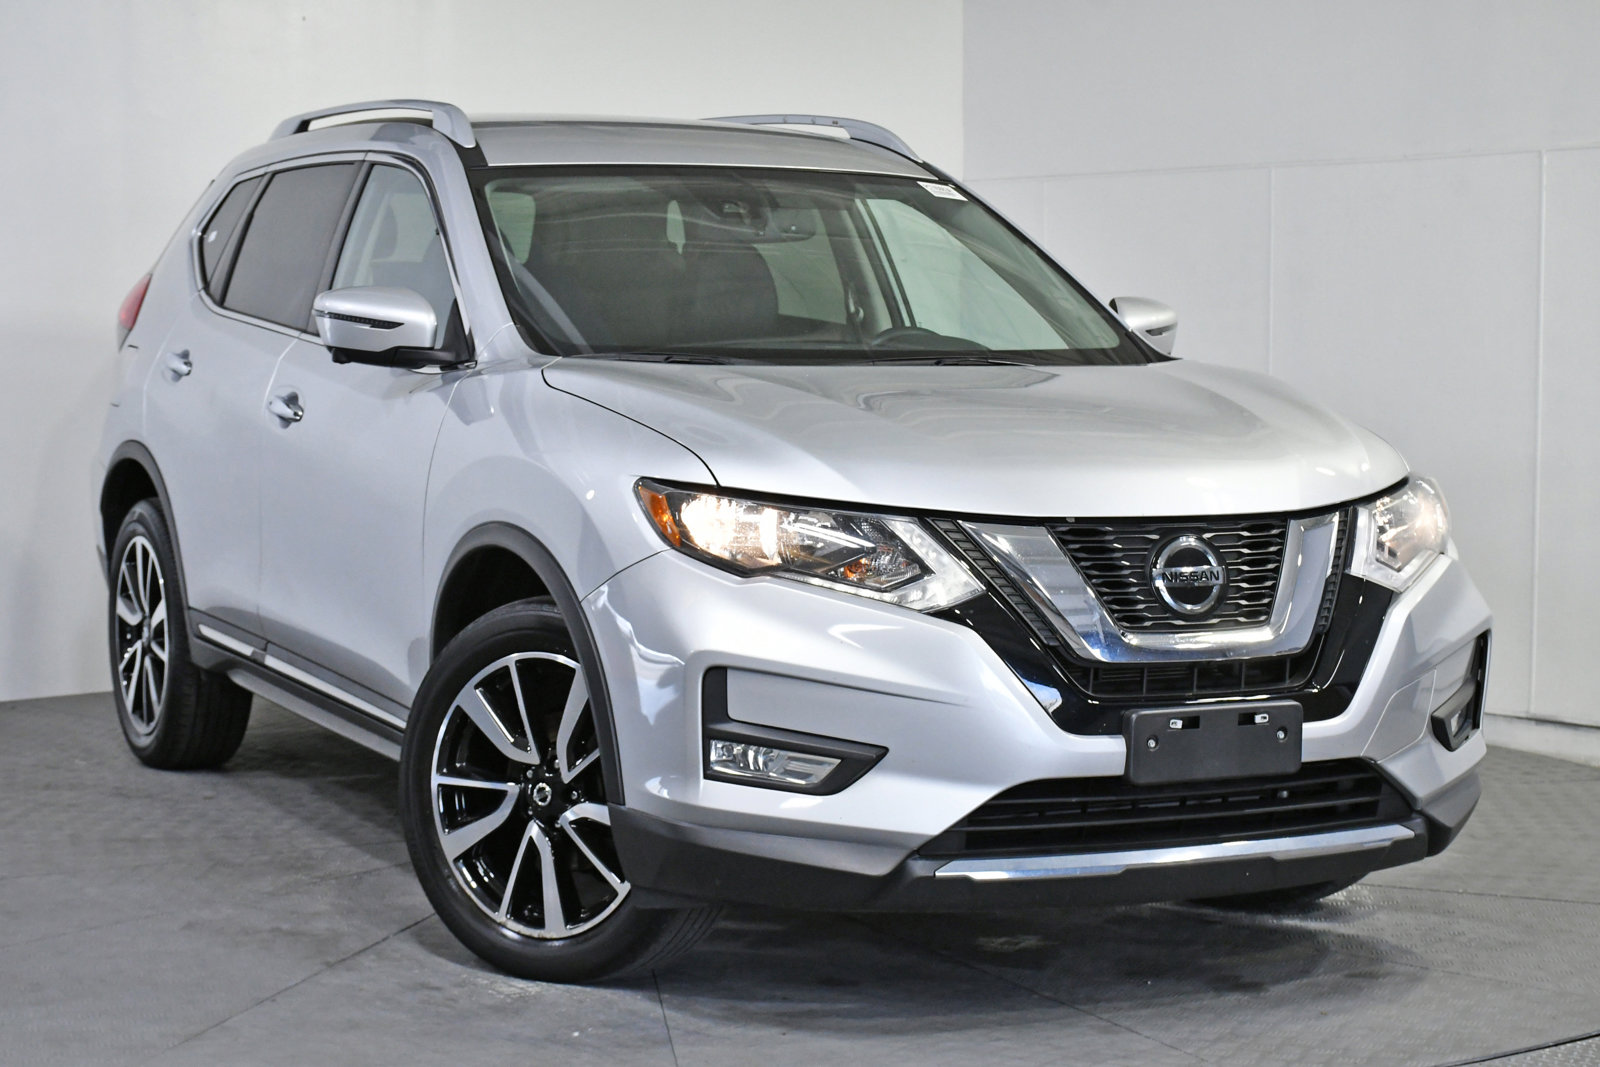 Certified Pre-Owned 2019 Nissan Rogue SL Sport Utility in Delray Beach  #PC740663A | HGreg Nissan Delray